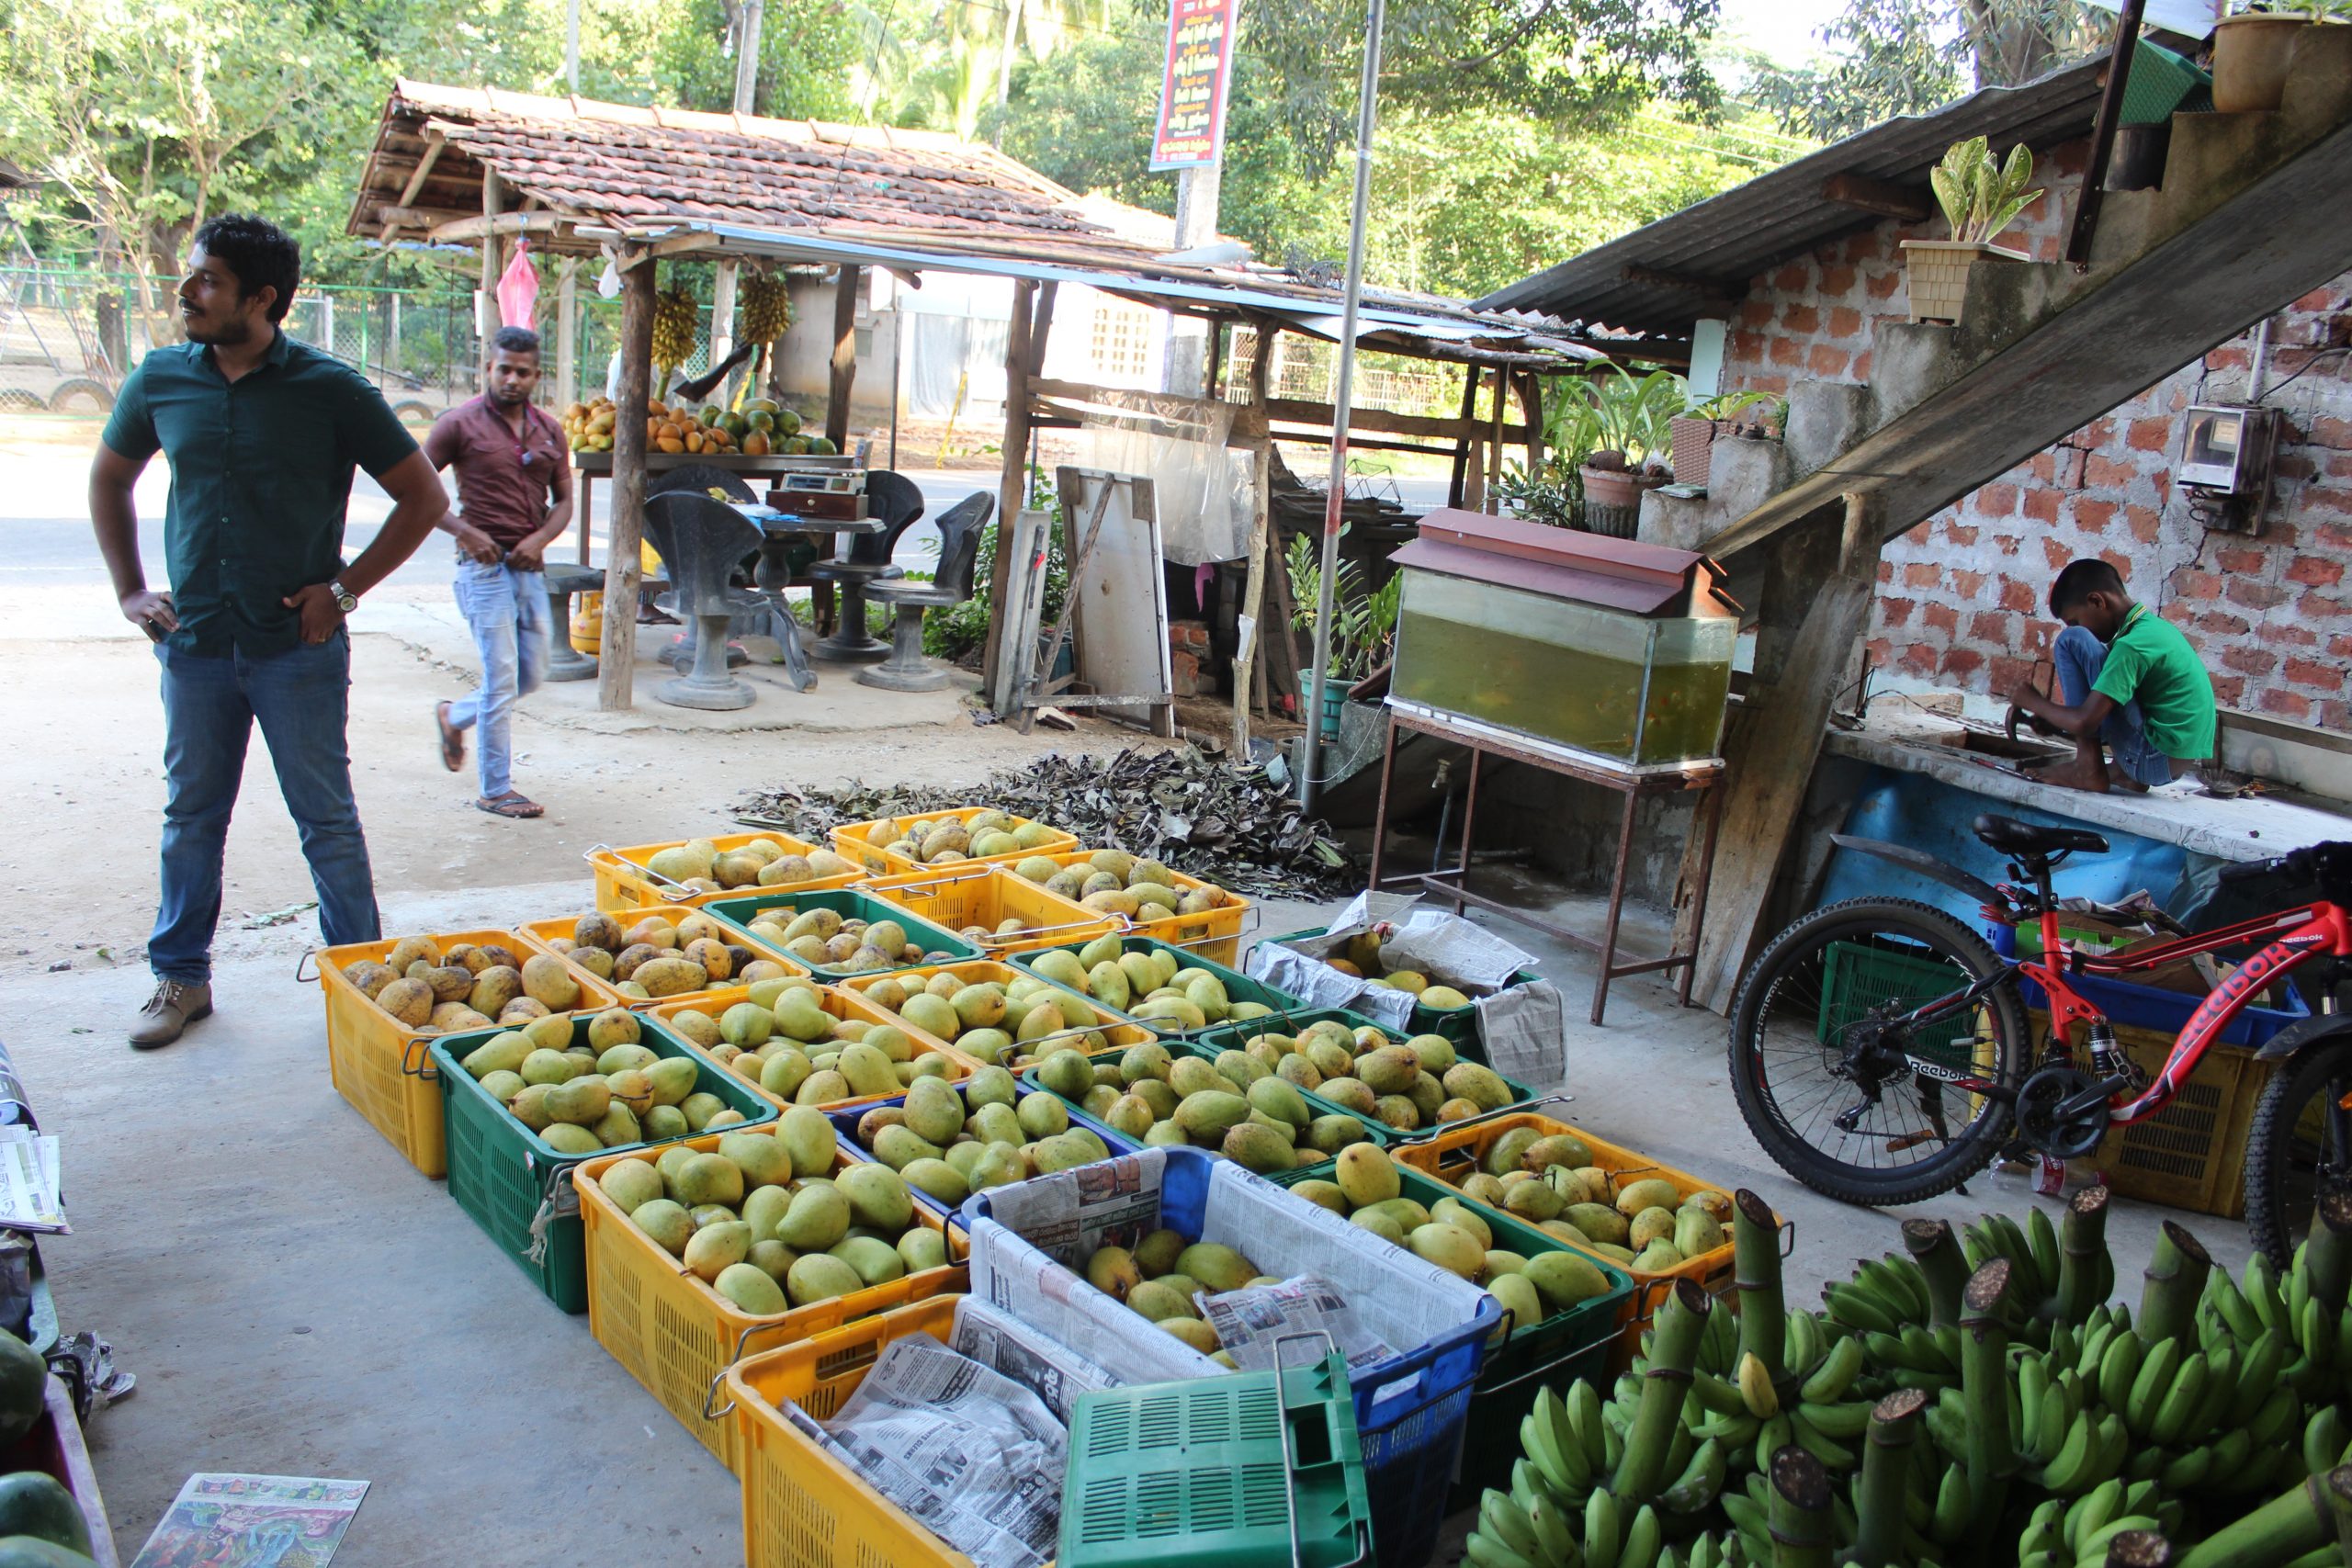 Bazaar Sax Full Hd - Sri Lanka : Bringing support to small businesses in rural areas